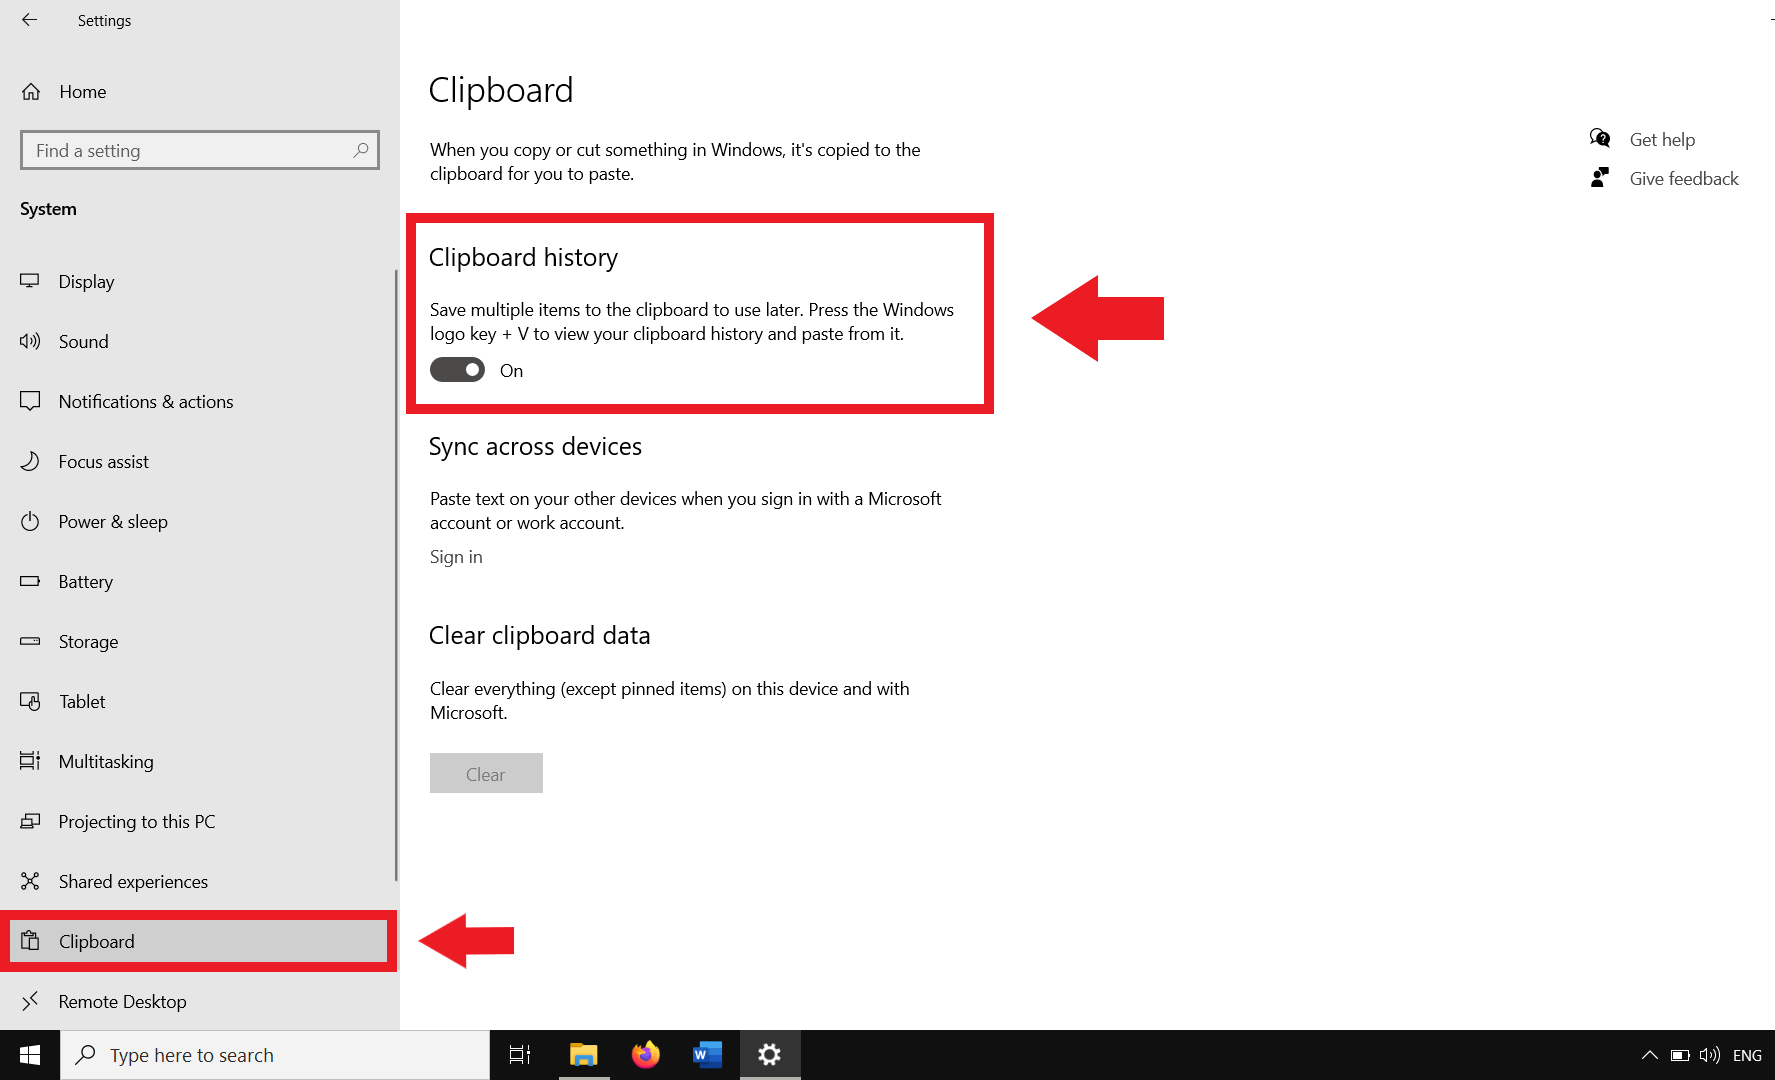 Clipboard in Windows settings with the “Clipboard history”